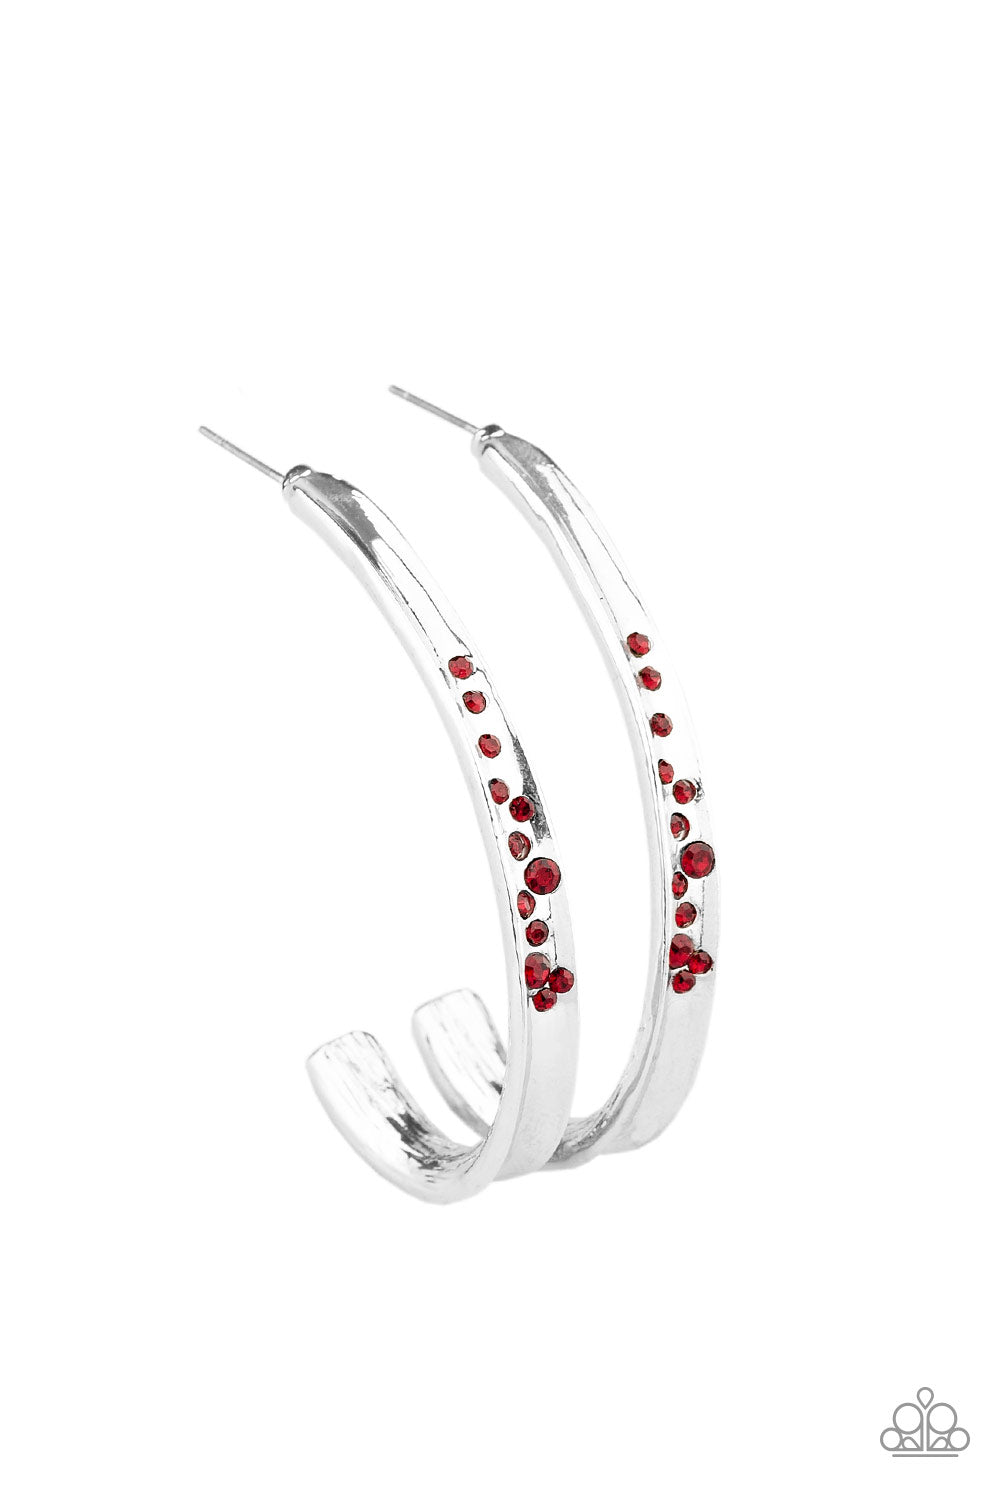 Completely Hooked Red Earrings